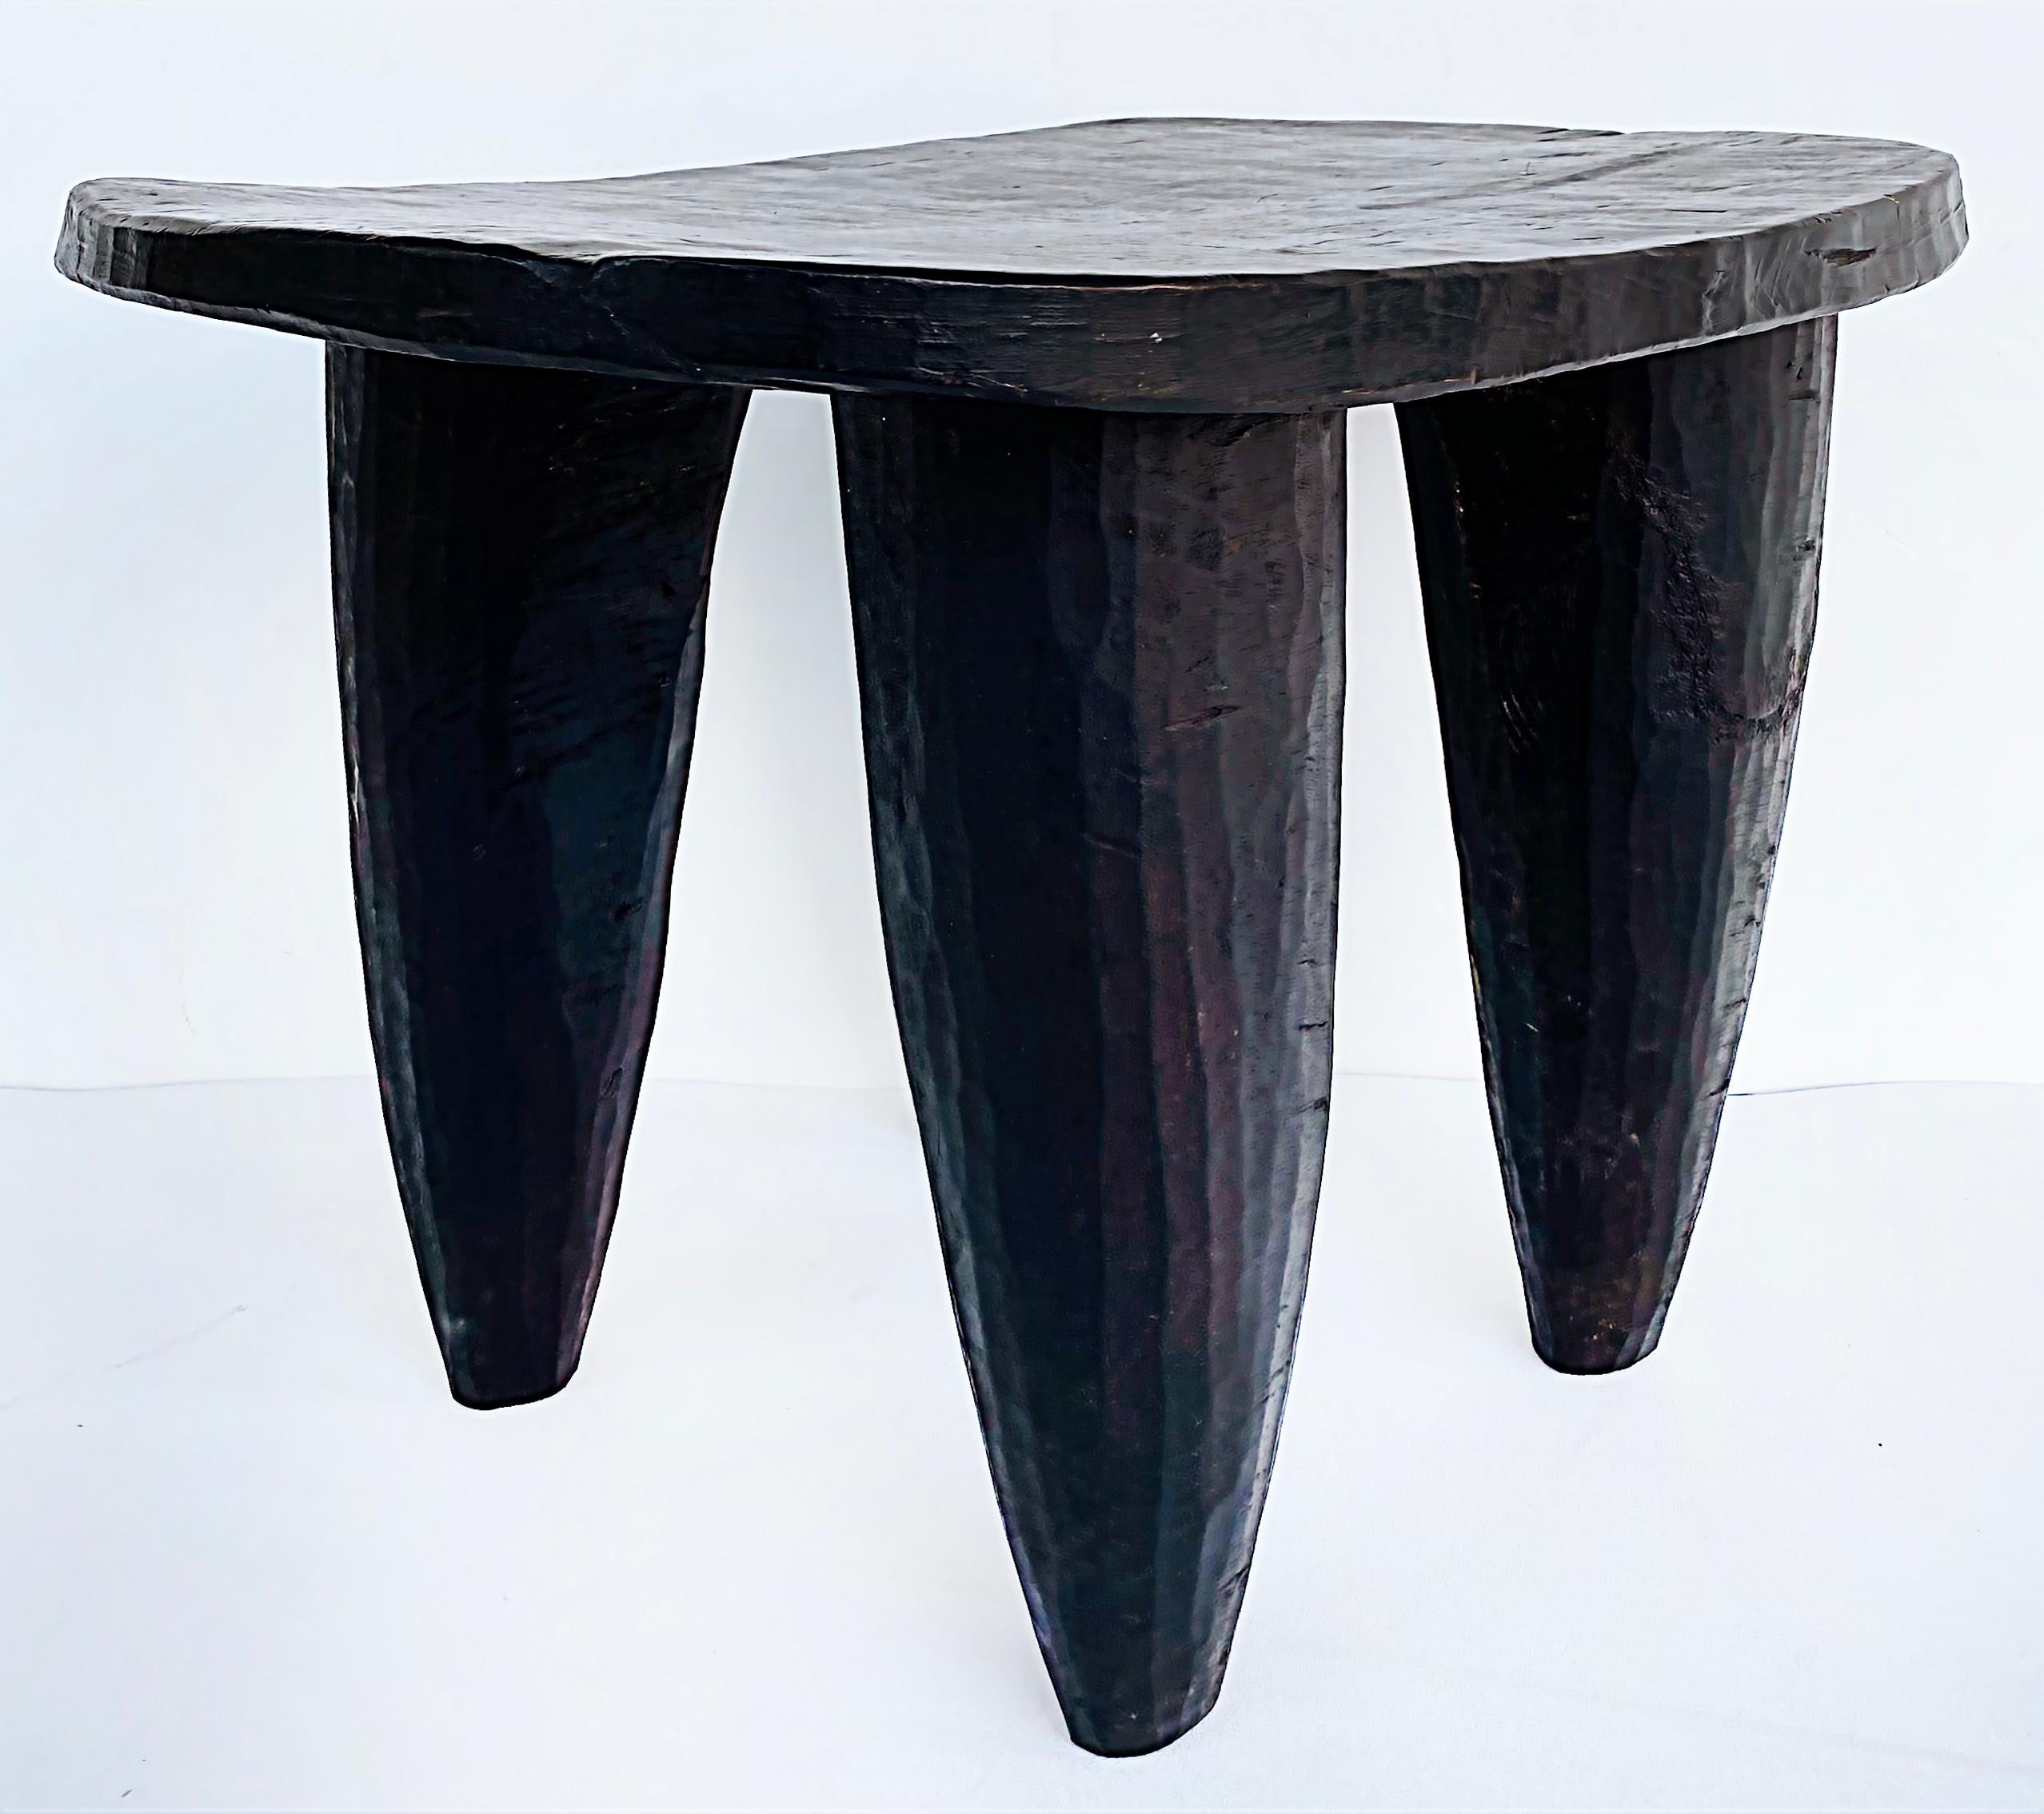 African Senufo Stool or Table from Cote d'Ivoire, Late 20th Century


Offered for sale is a 20th-century hand-carved Senufo stool from Cote d'Ivoire. The stool is stable and quite sensual. The wood shows lovely rustic textures of the hand